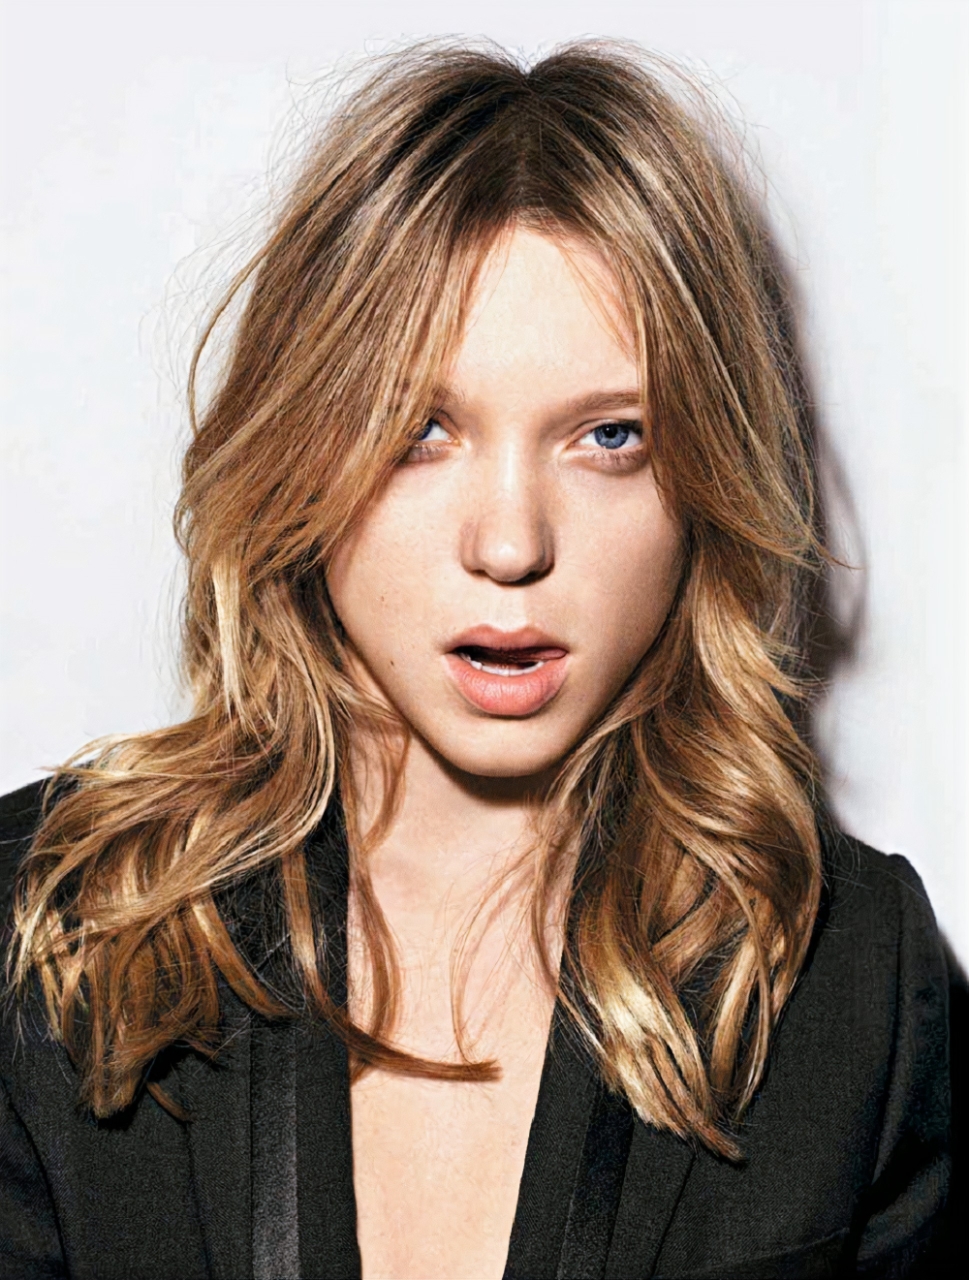 People 969x1280 Léa Seydoux women actress French long hair tongue out blue eyes face